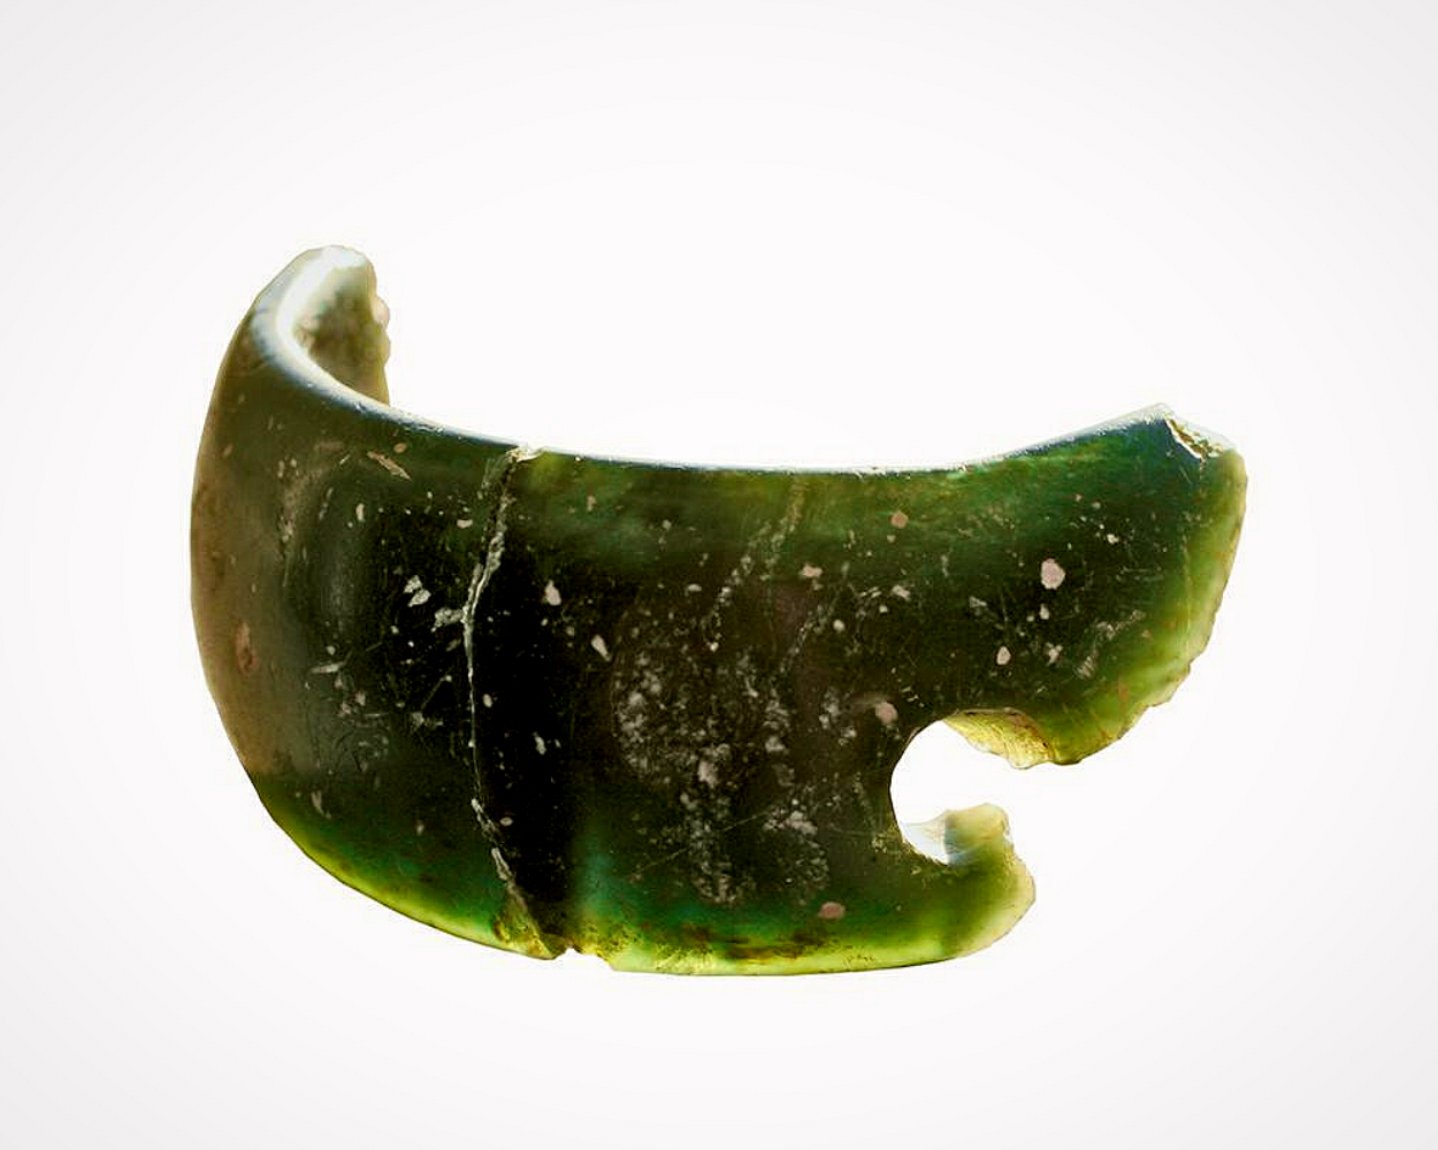 Made of chlorite, the bracelet was found in the same layer as the remains of some of the prehistoric people and is thought to belong to them.